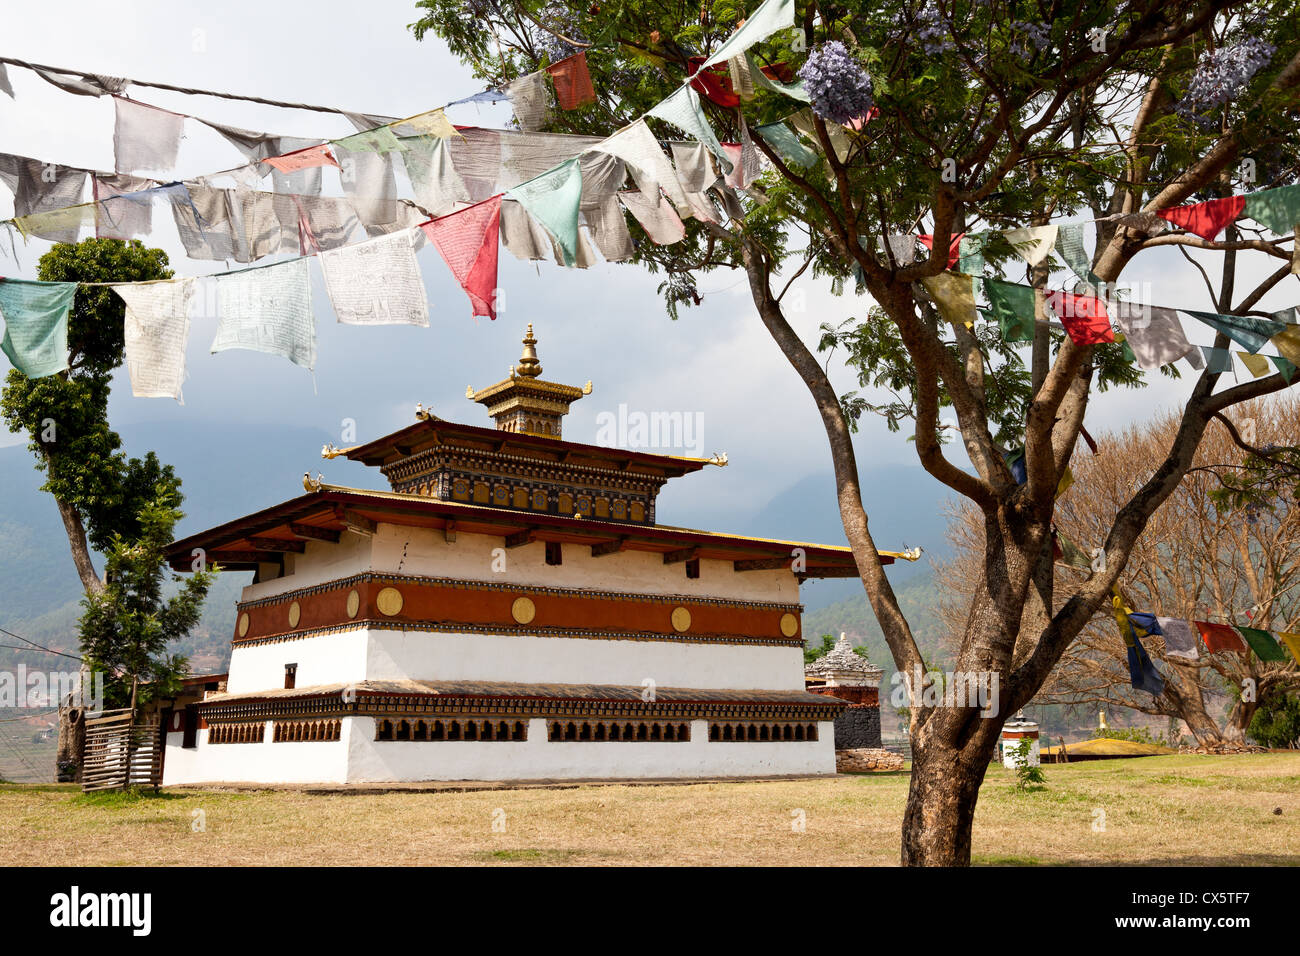 Chimi Lhakhang temple Banque D'Images